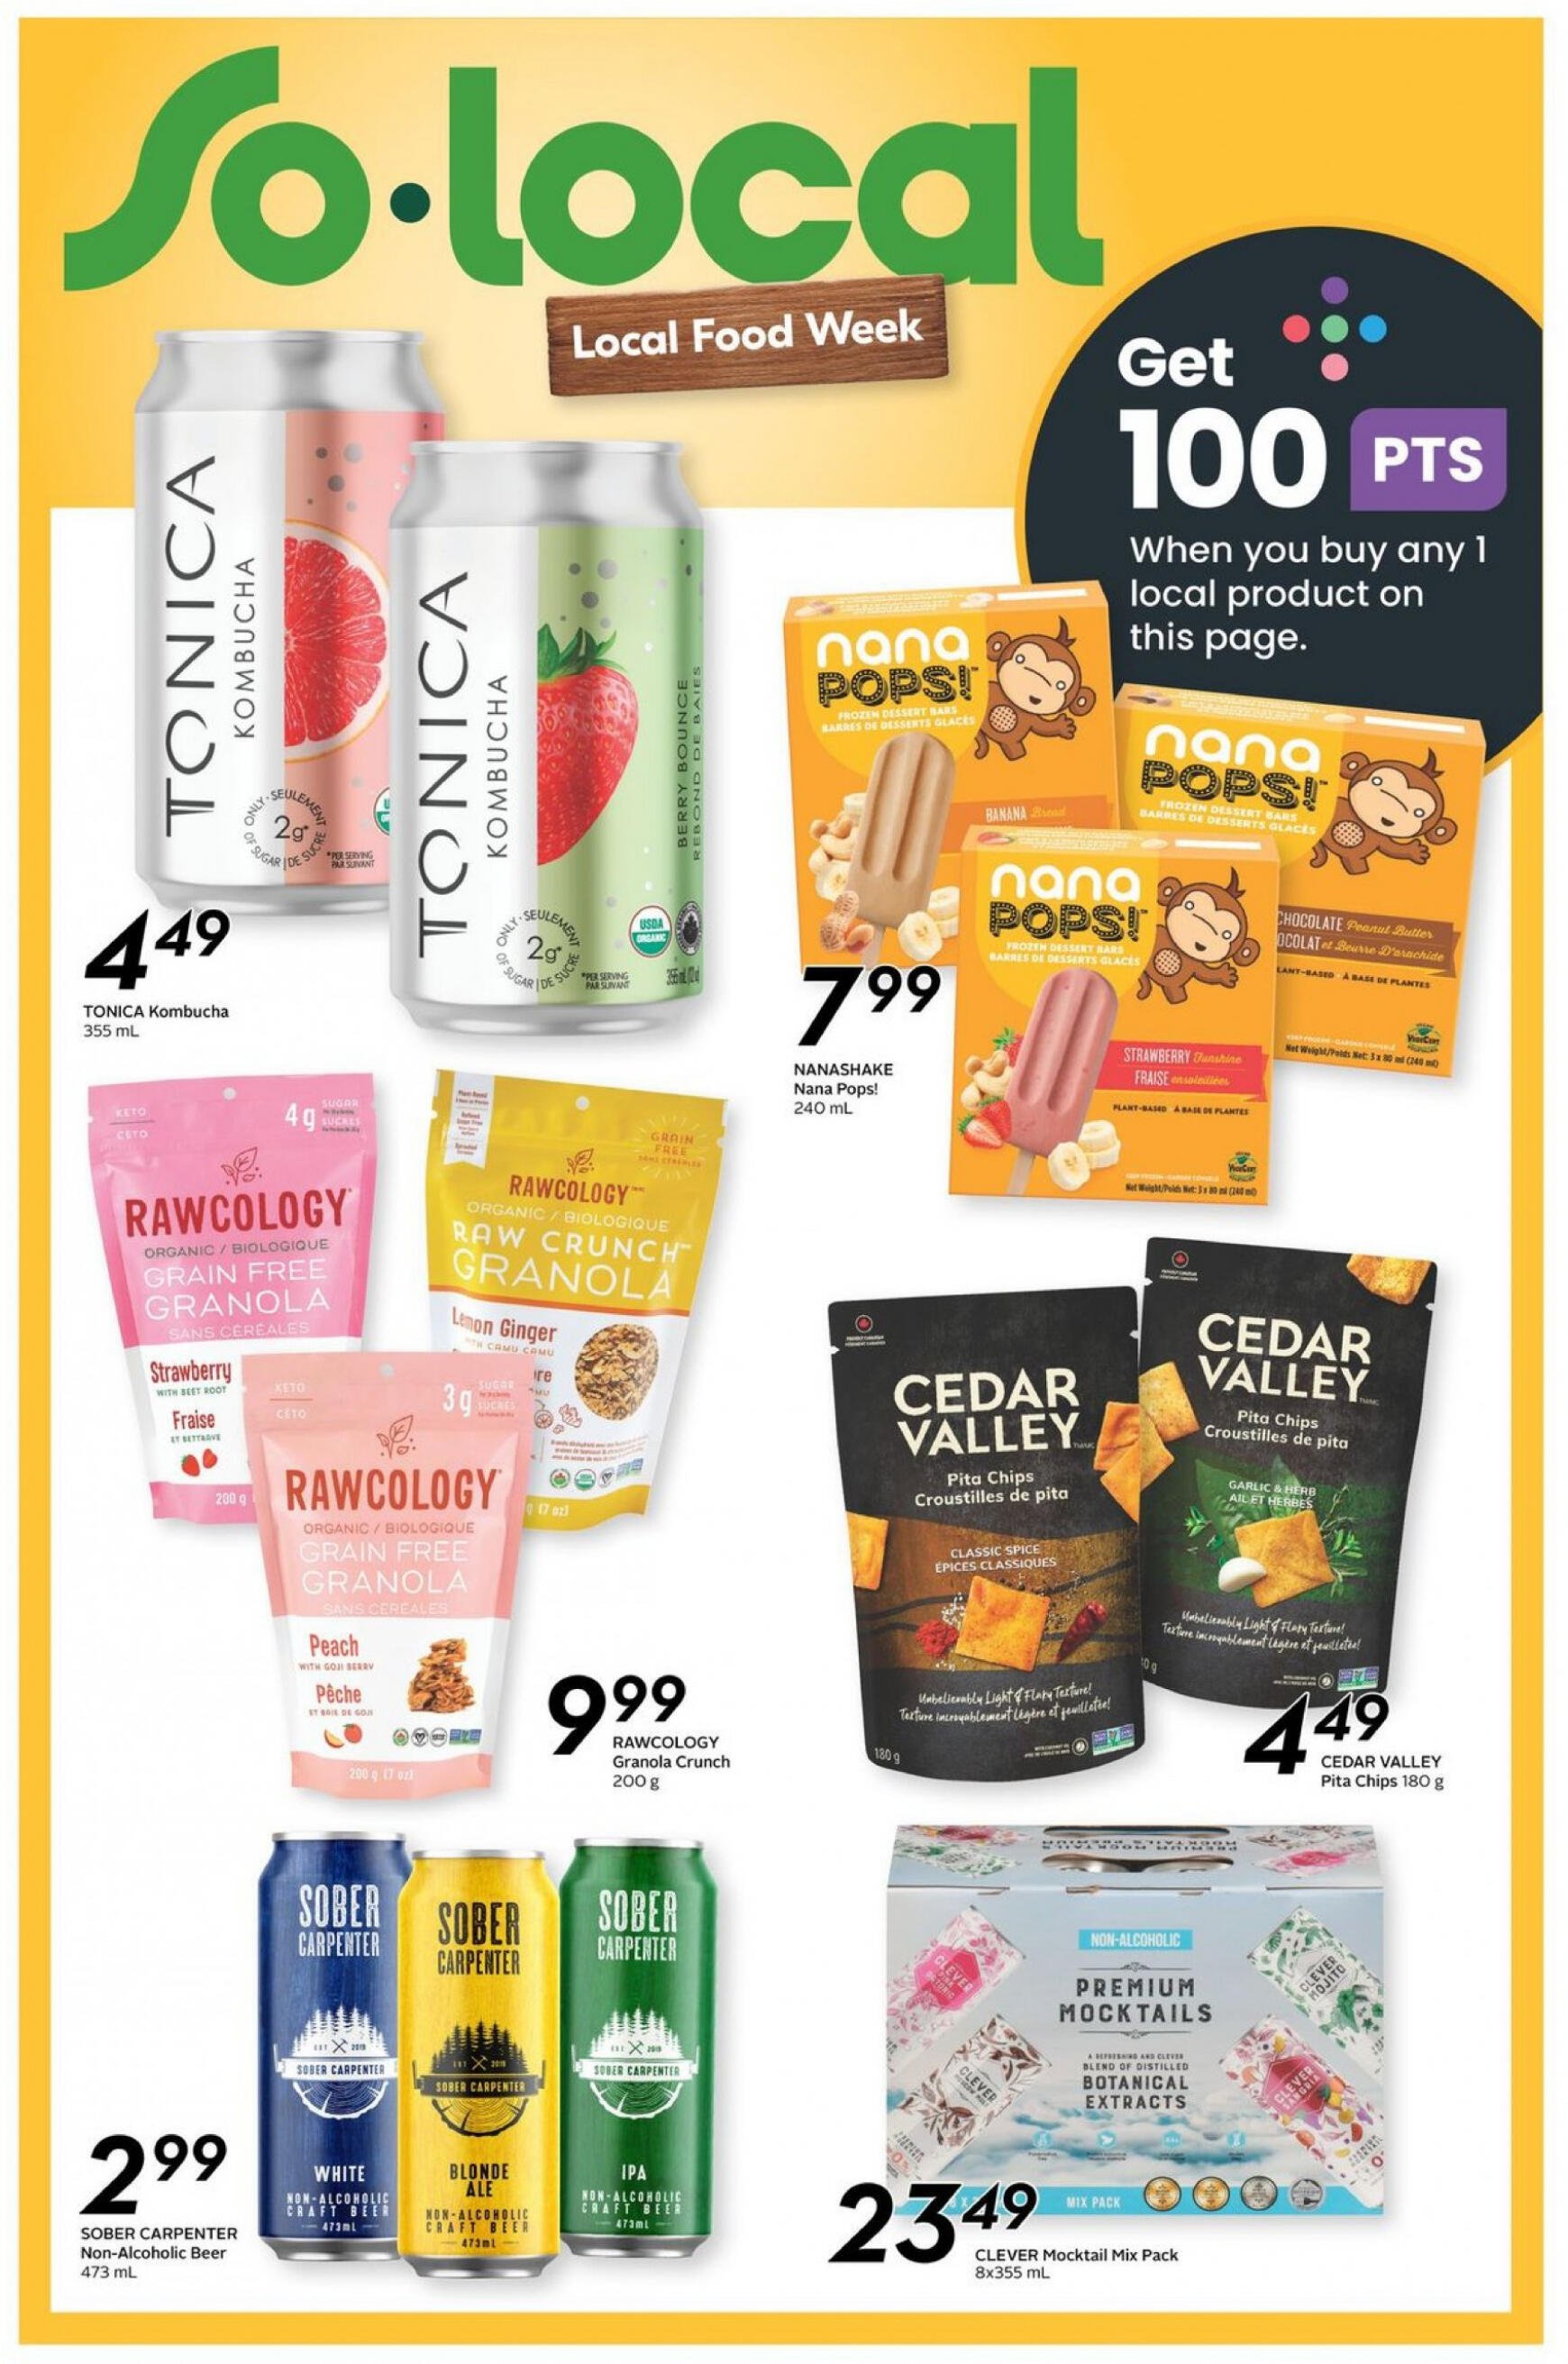 sobeys - Sobeys - Weekly Flyer - Ontario flyer current 06.06. - 12.06. - page: 11